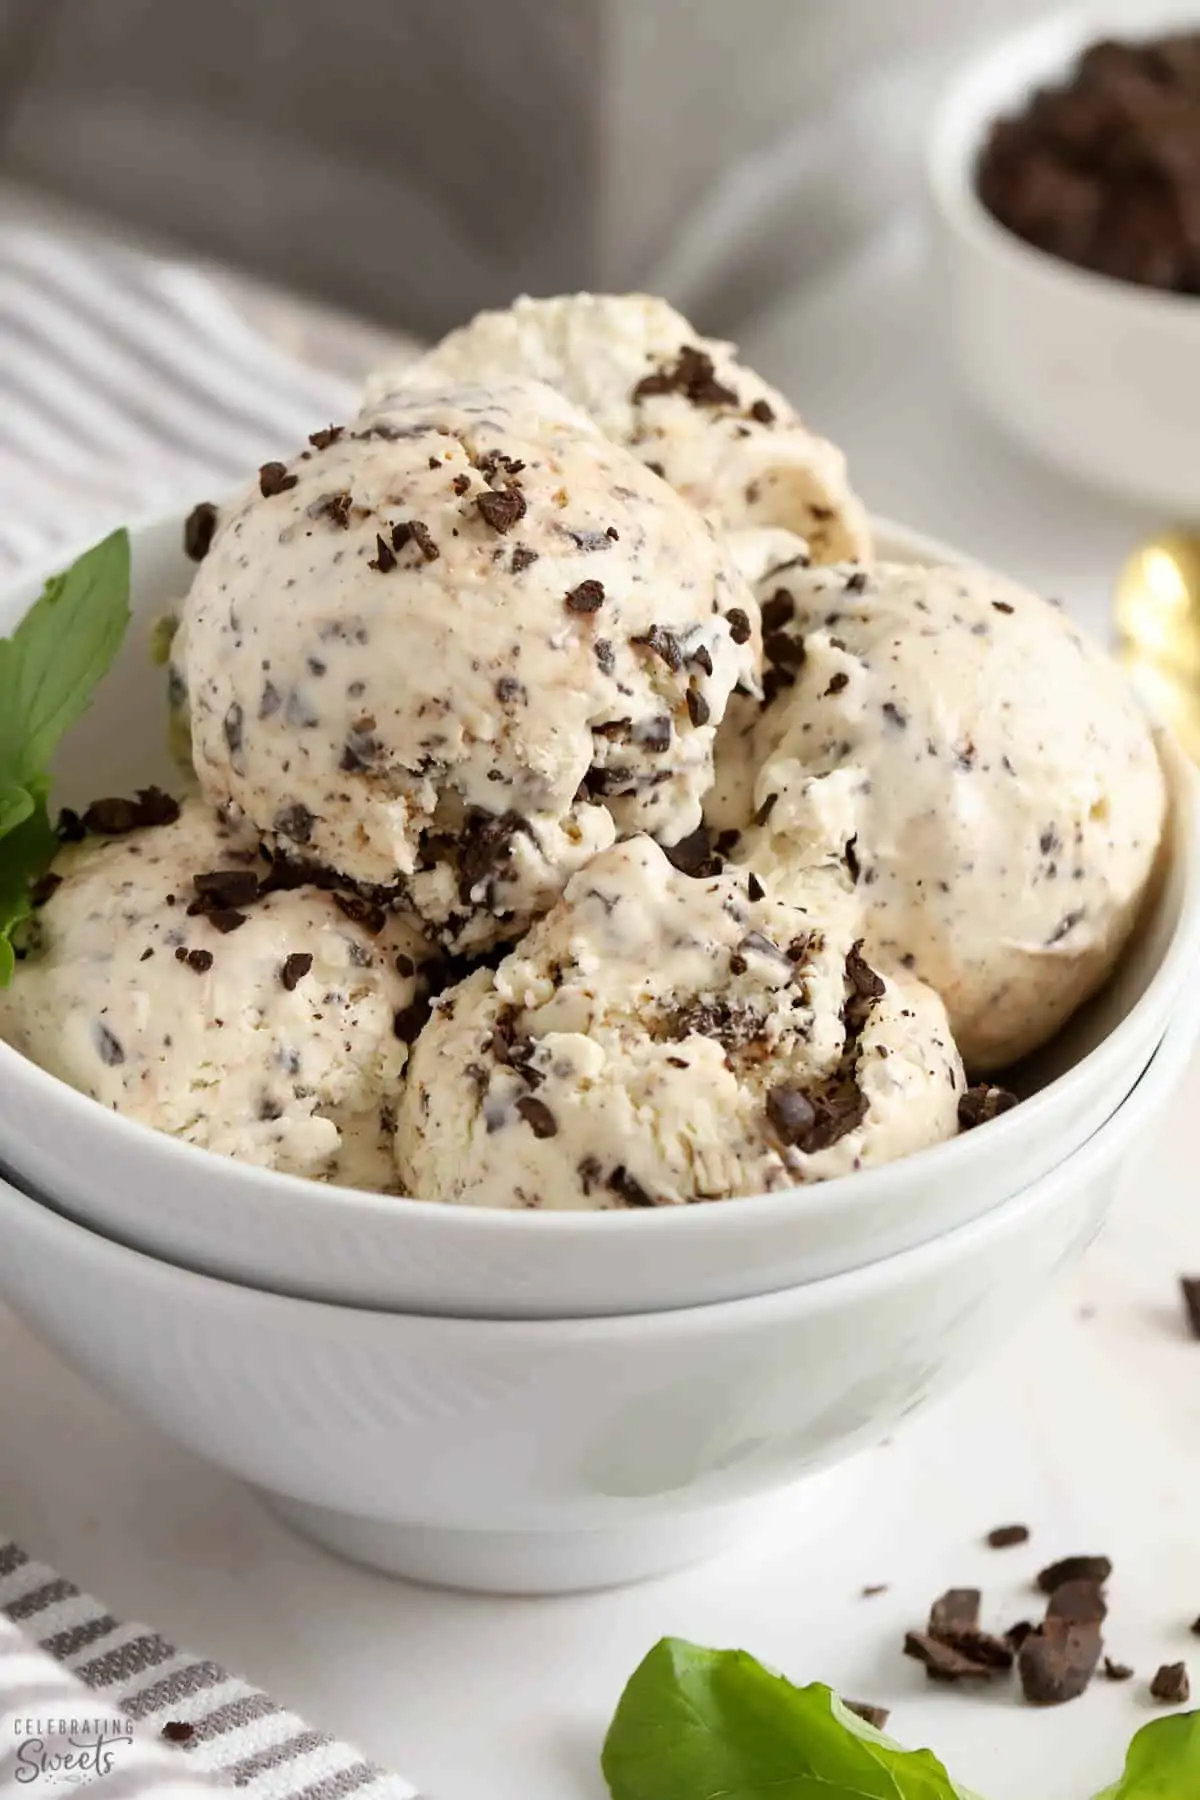 Scoops of mint chip ice cream in a white bowl garnished with fresh mint.